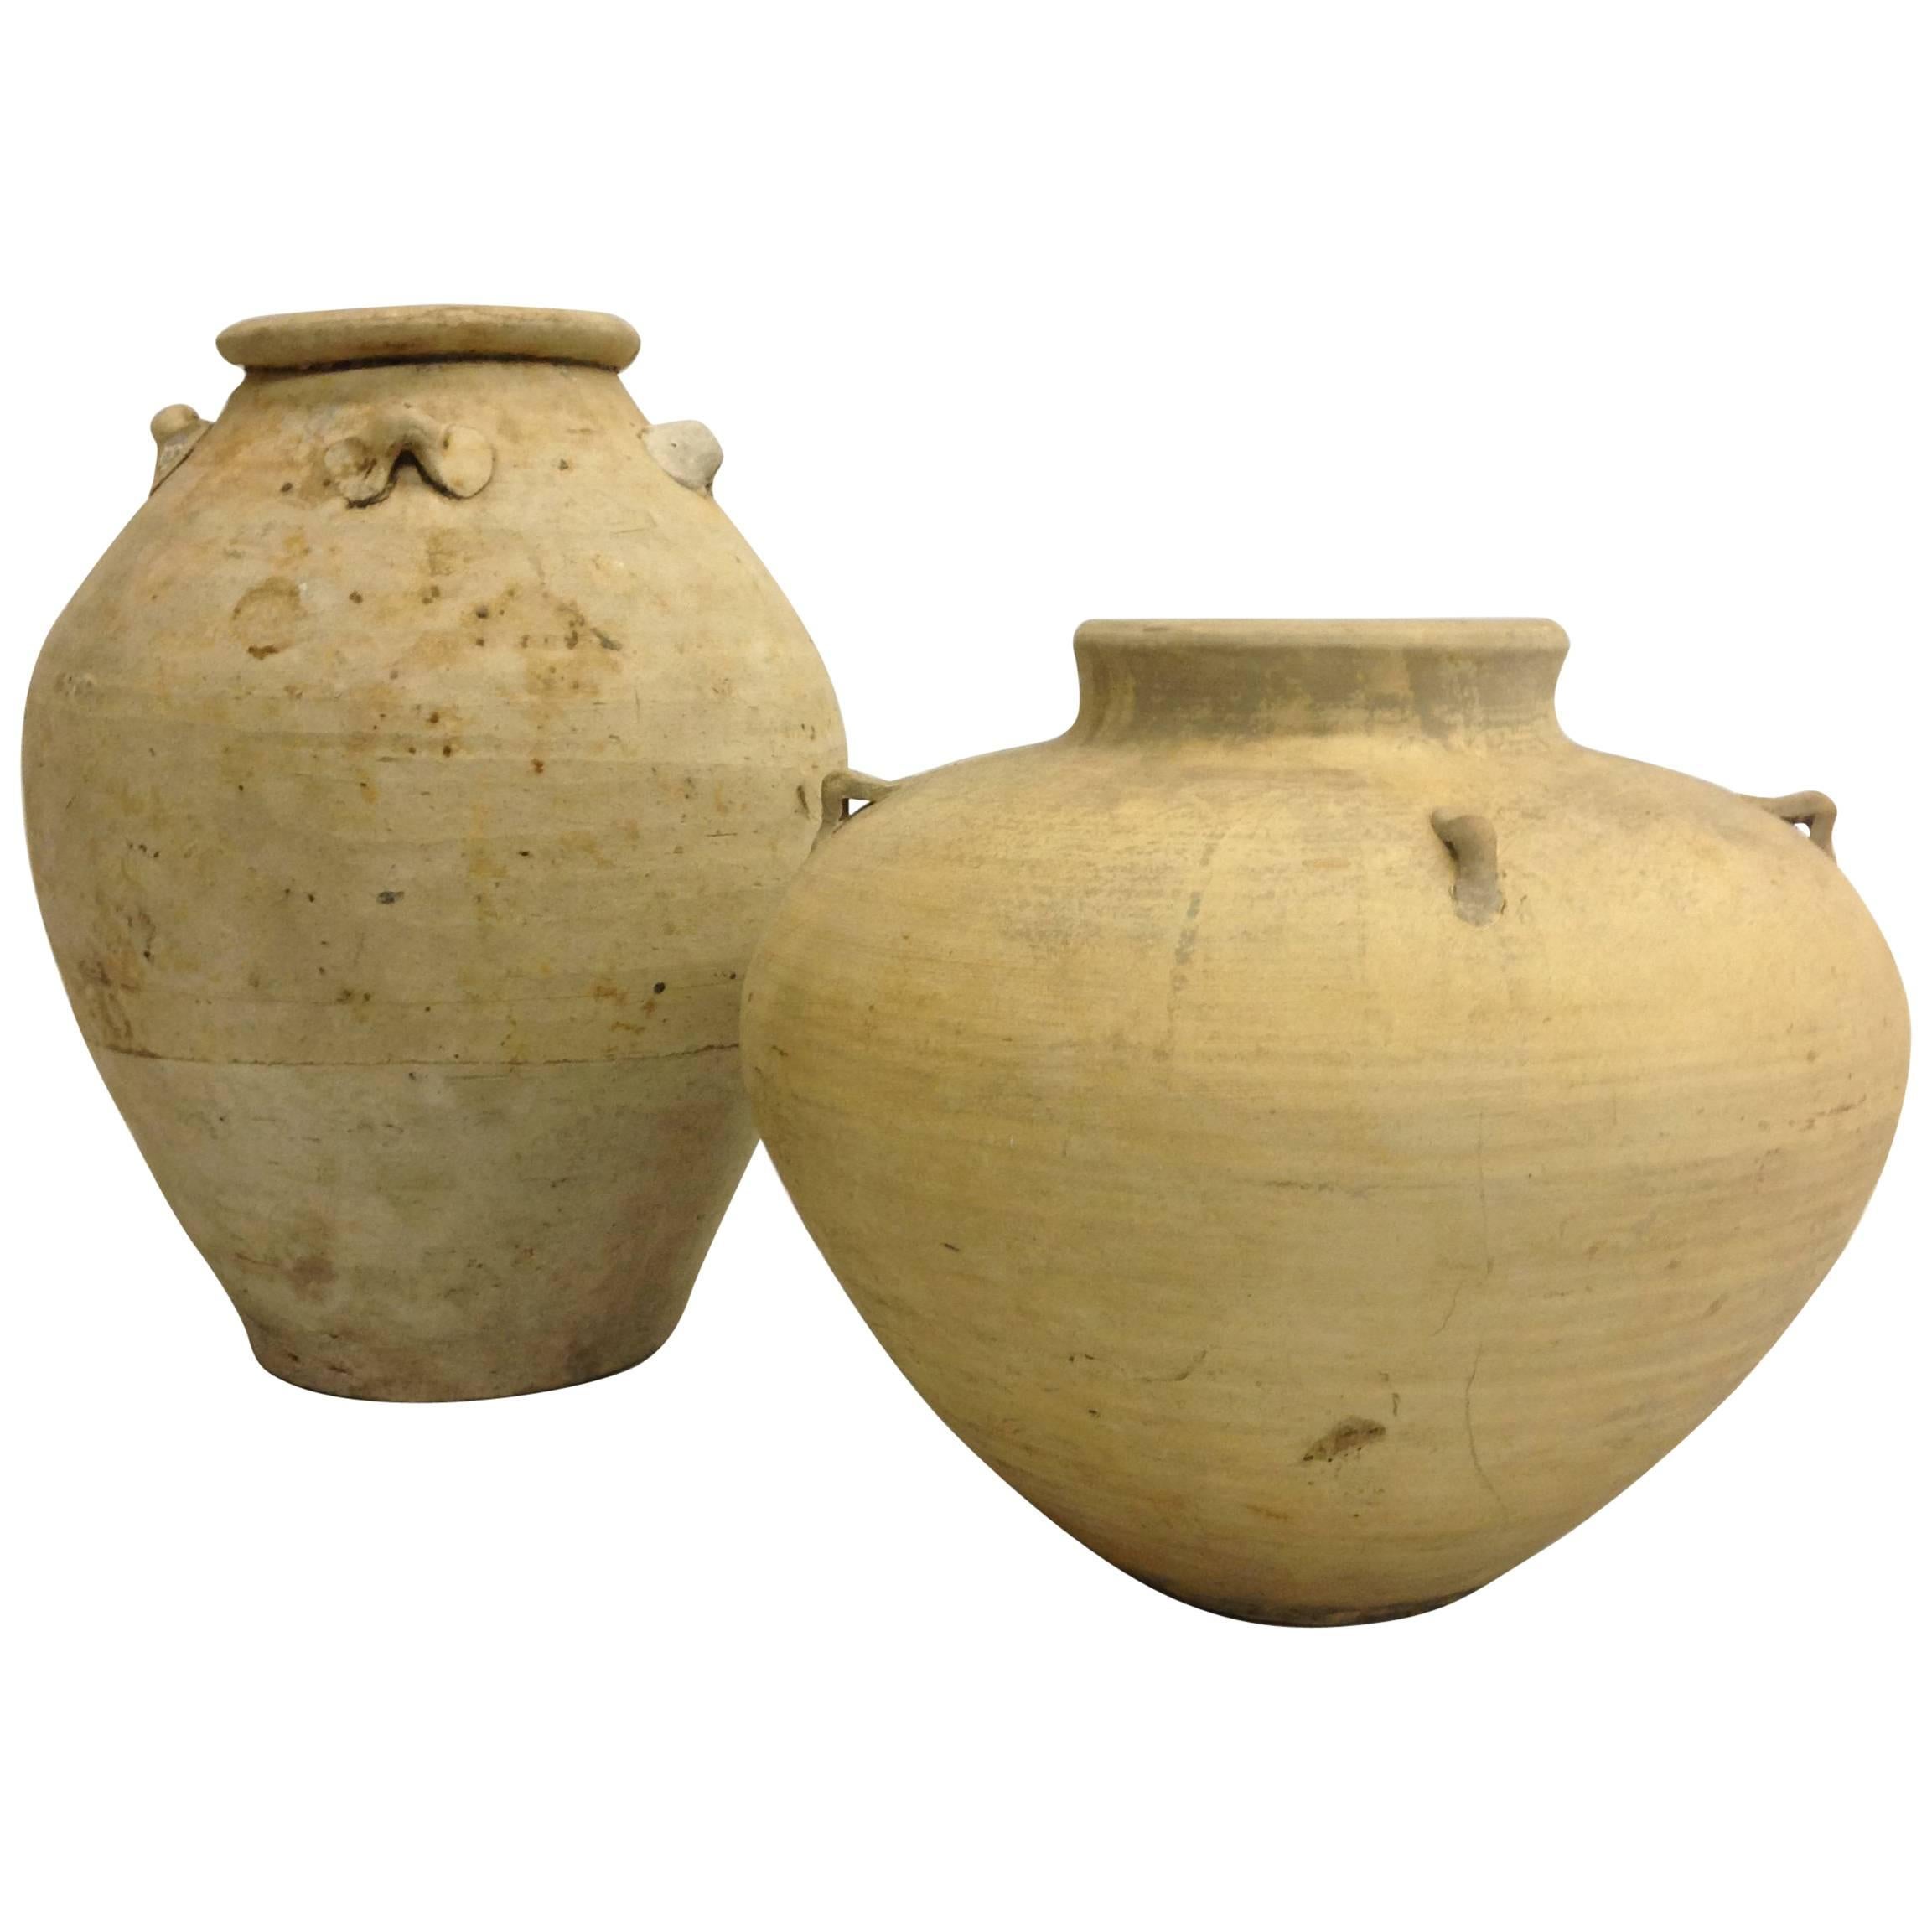 Two Ancient Khmer Urns or Vases